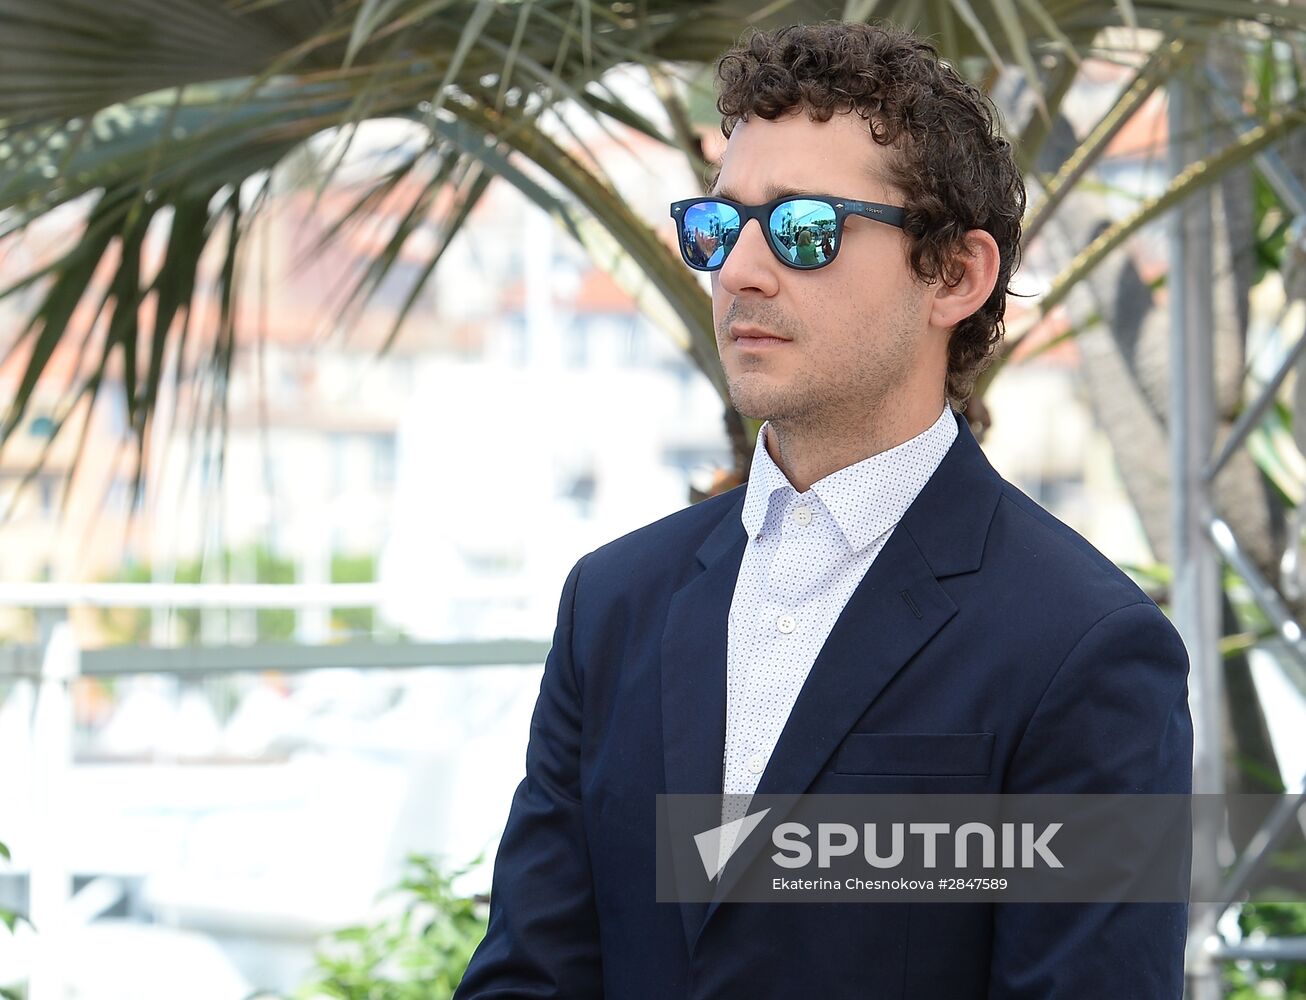 69th Cannes Film Festival. Day 4